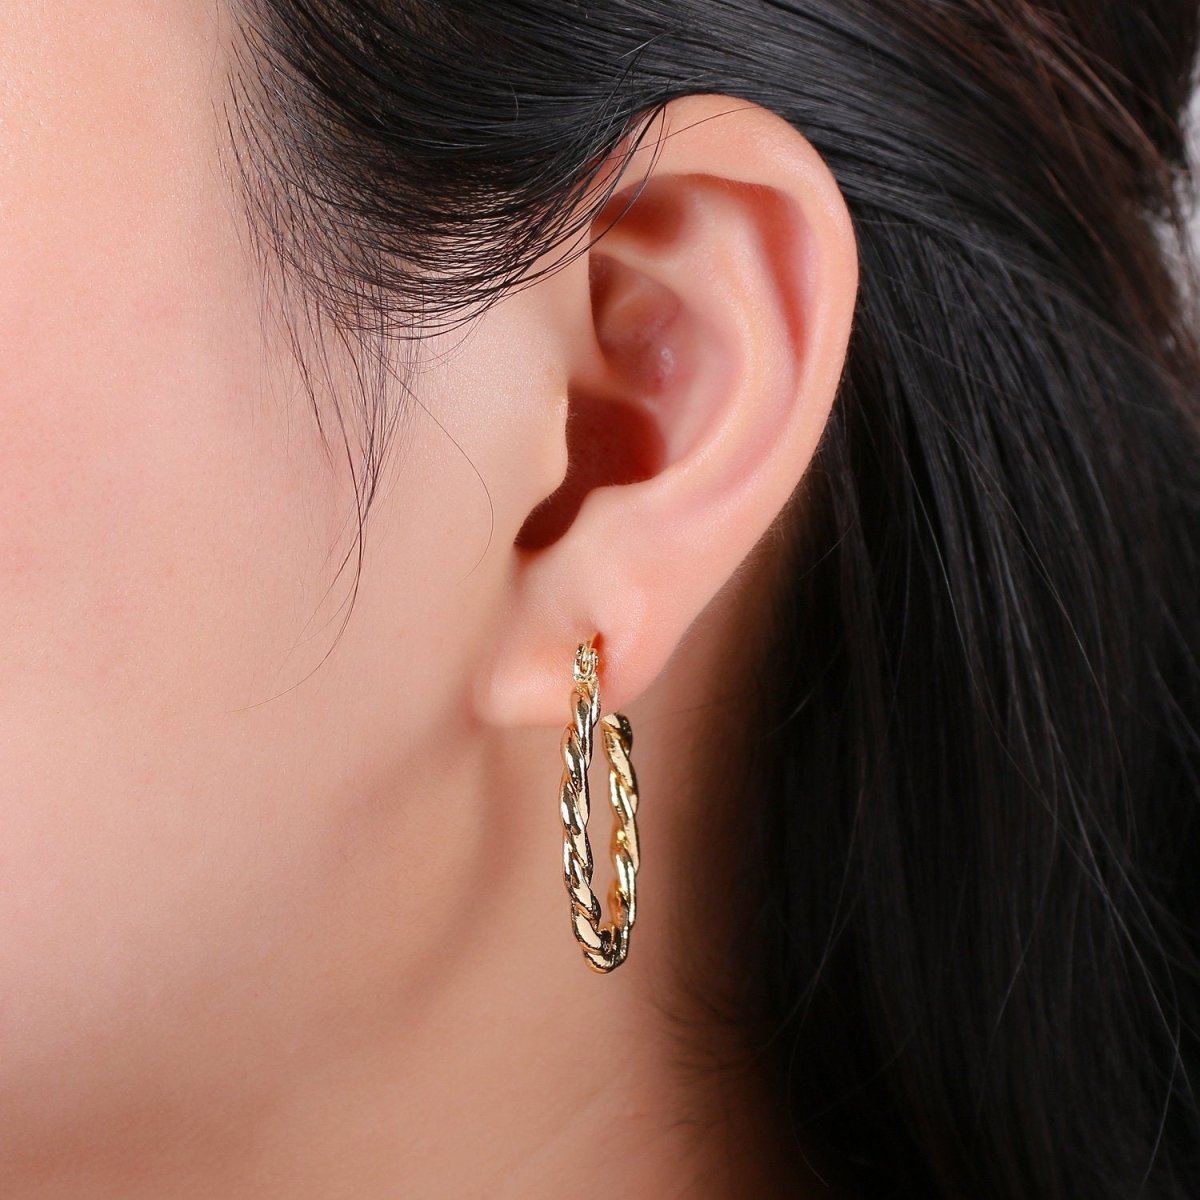 Bold Twisted Hoops in Gold • Minimalist Earrings • Modern Thick Hoops • Perfect Gift for Her Statement Hoops Earring in Vermeil 30mm Hoops Q-237 - DLUXCA